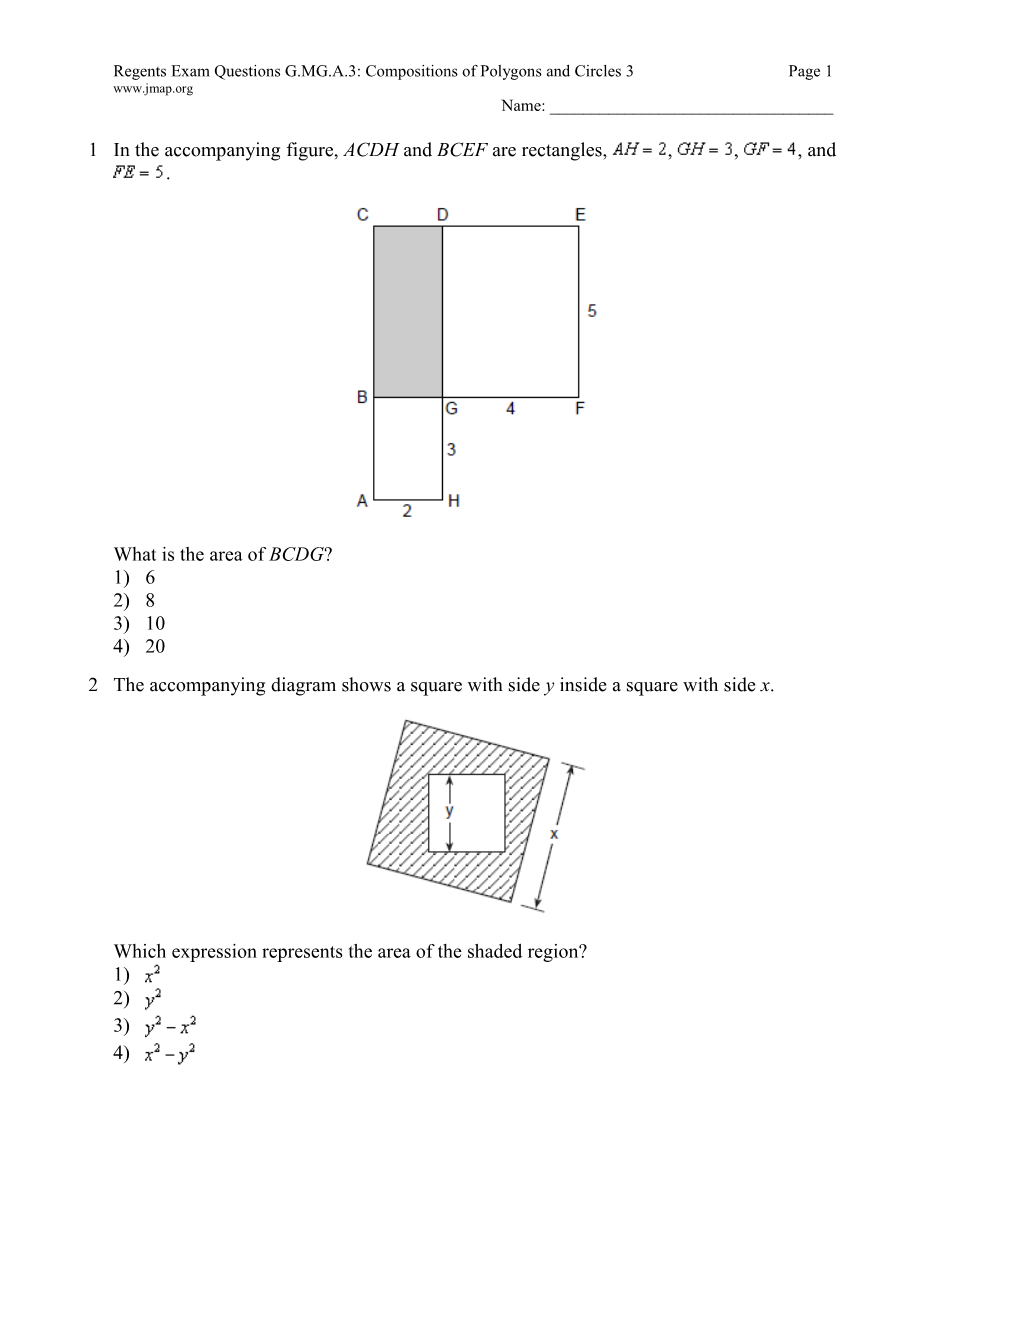 Regents Exam Questions G.MG.A.3: Compositions of Polygons and Circles 3 Page 5